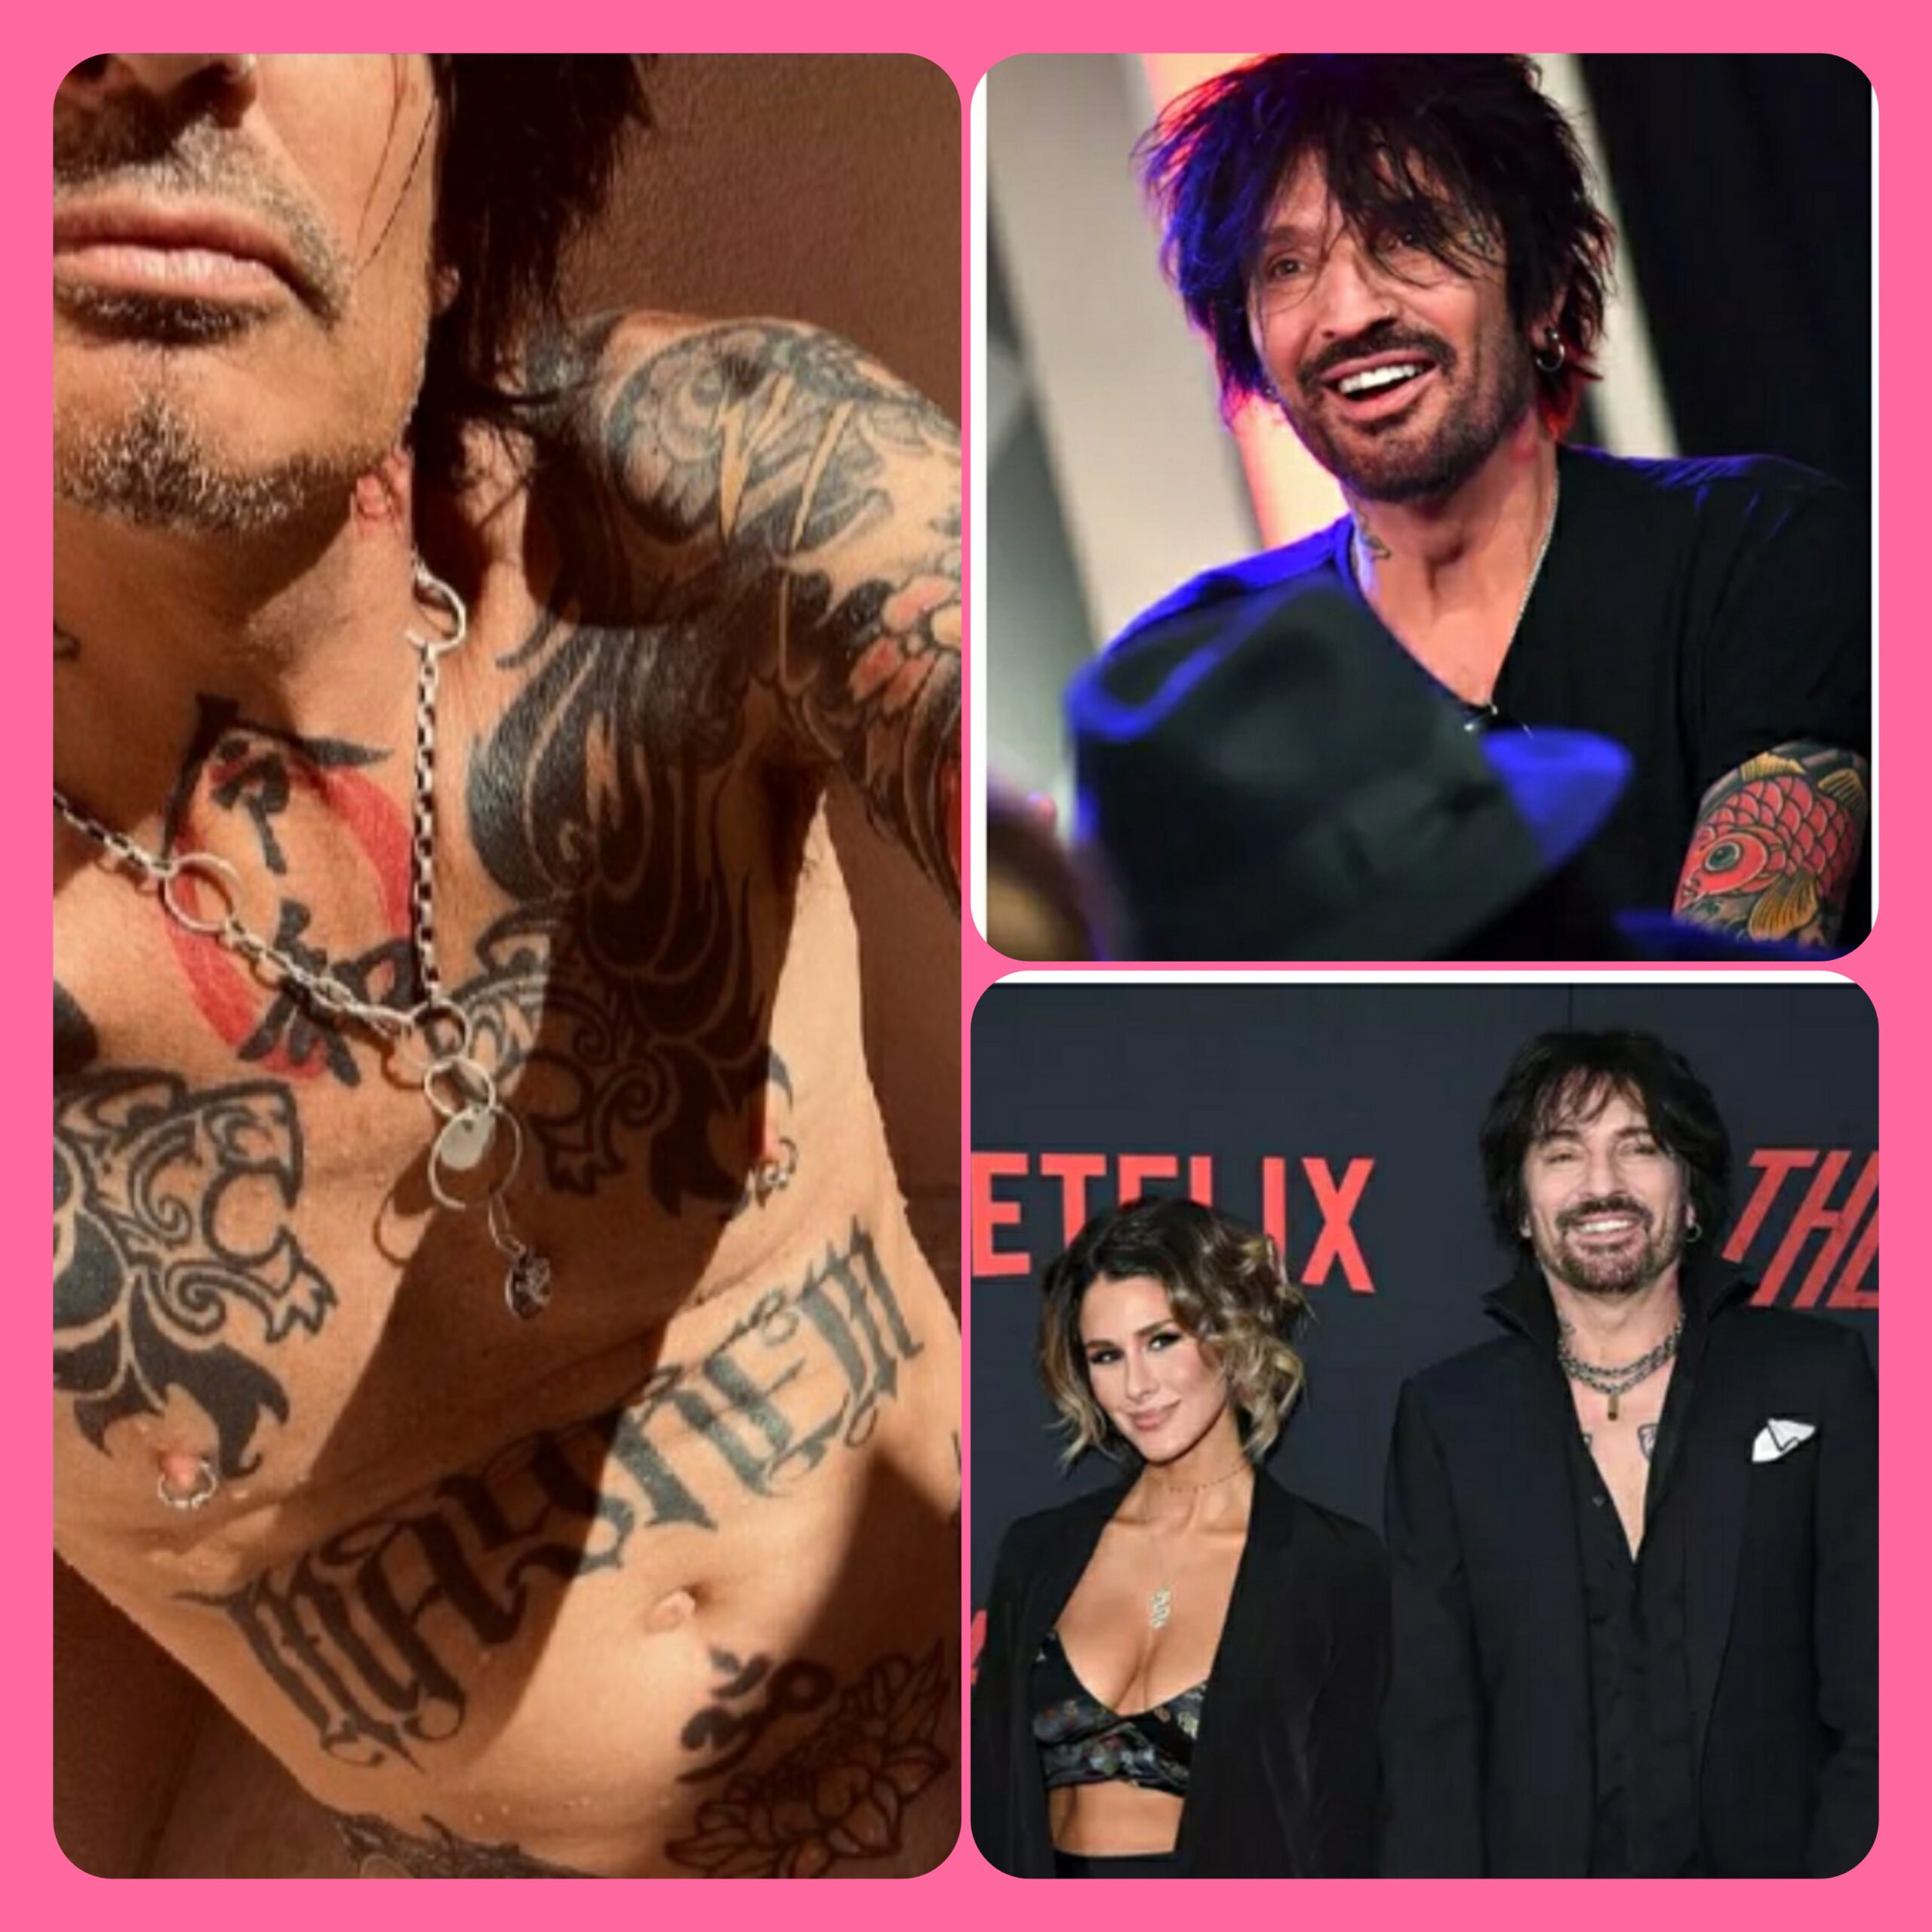 Tommy Lee x-rated Instagram viral photos